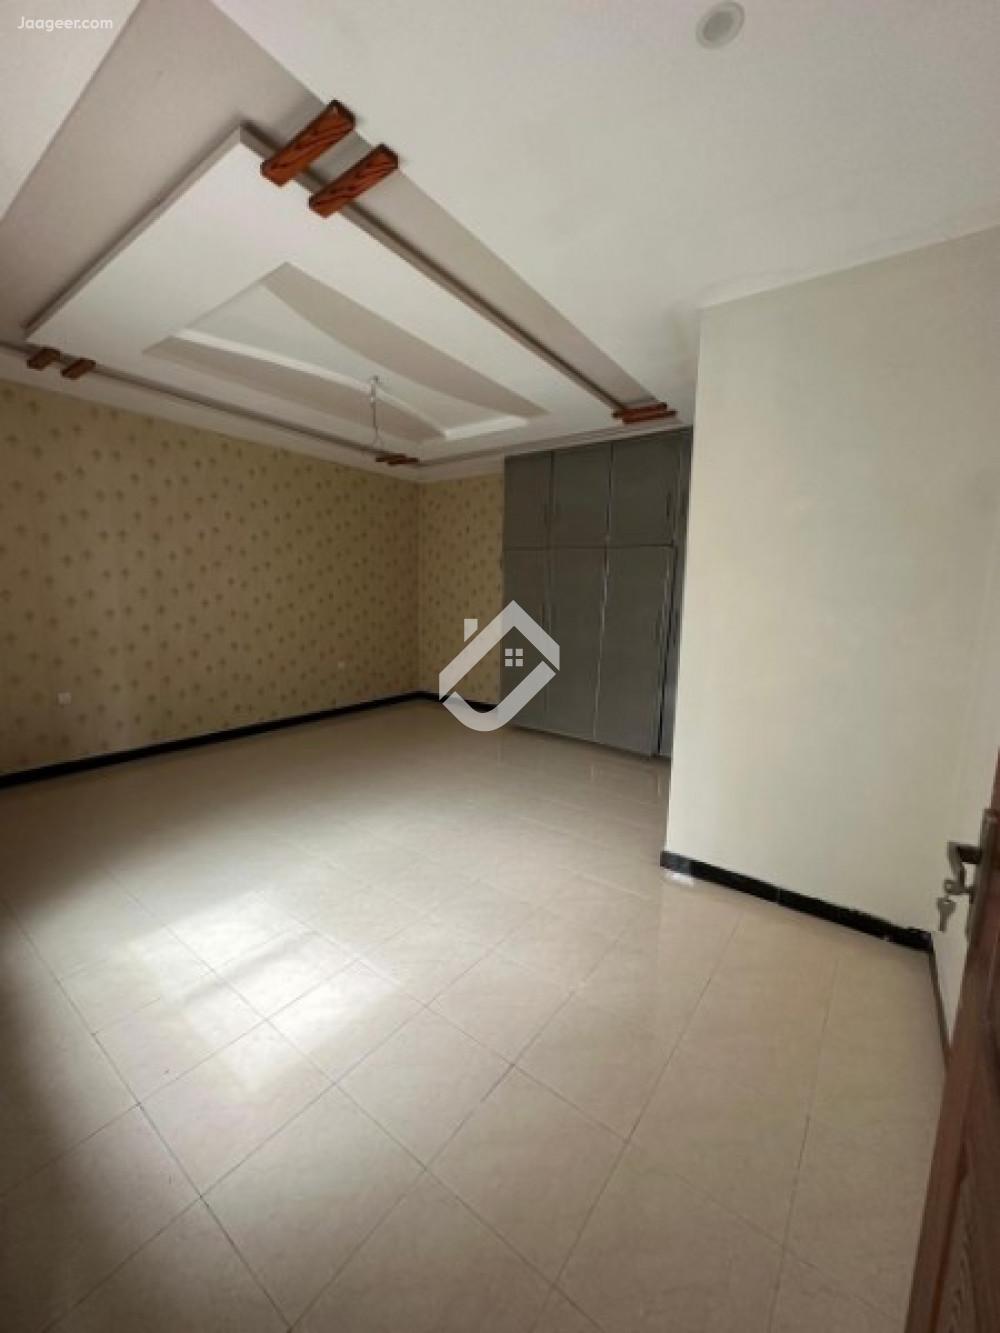 Main image 10 Marla House For Rent In Muhafiz Town Faisalabad road 